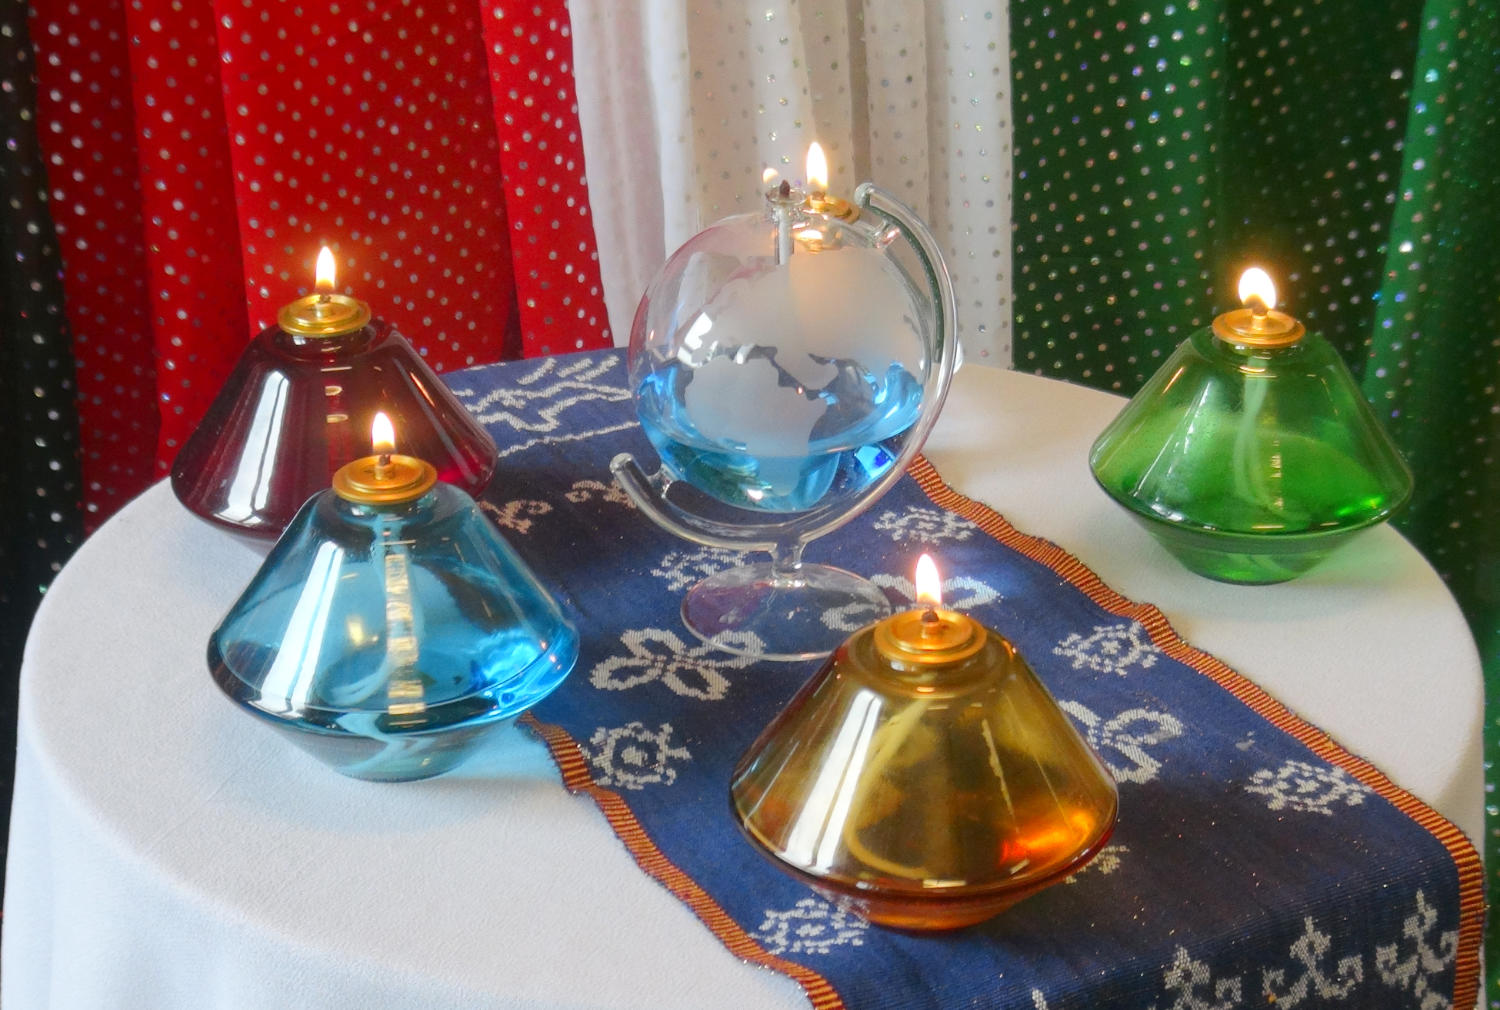 Five Glass Lamps, with Missionary Colors, Representing the Five Continents